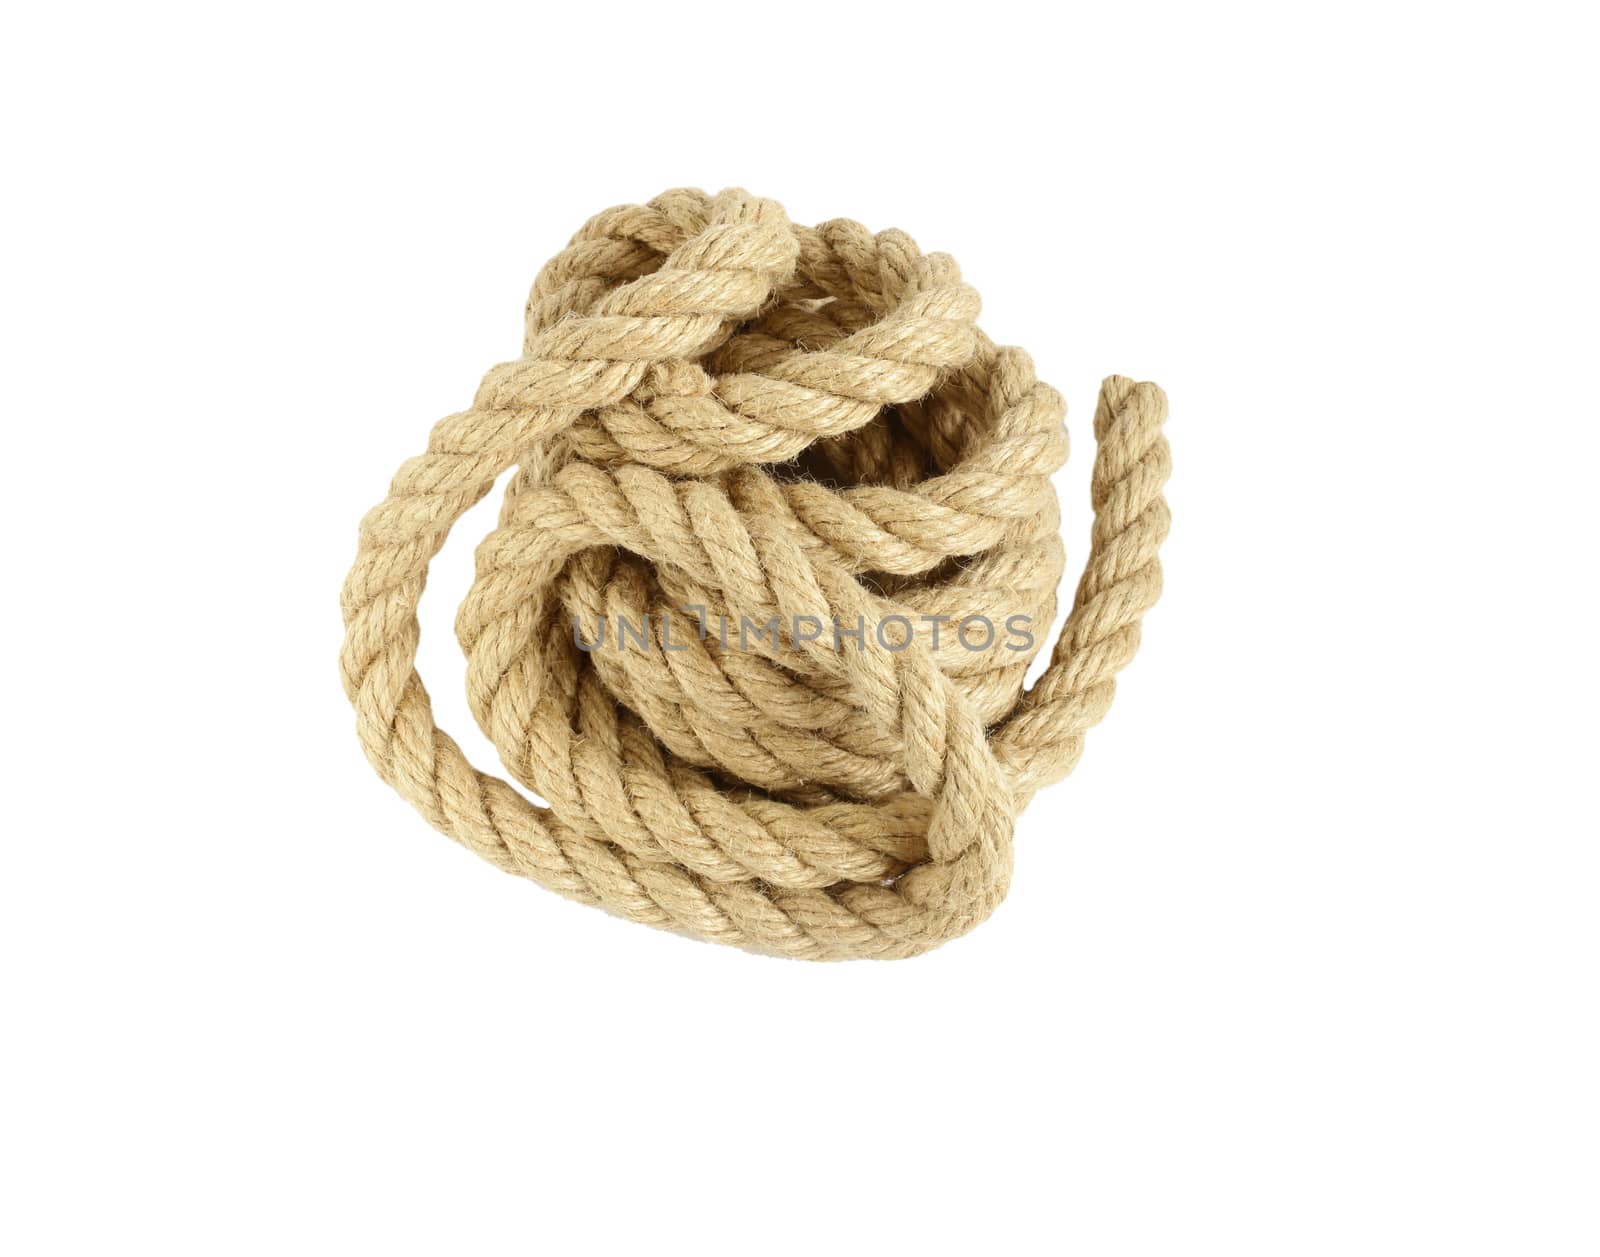 natural rope not replace synthetics by Andrymas777